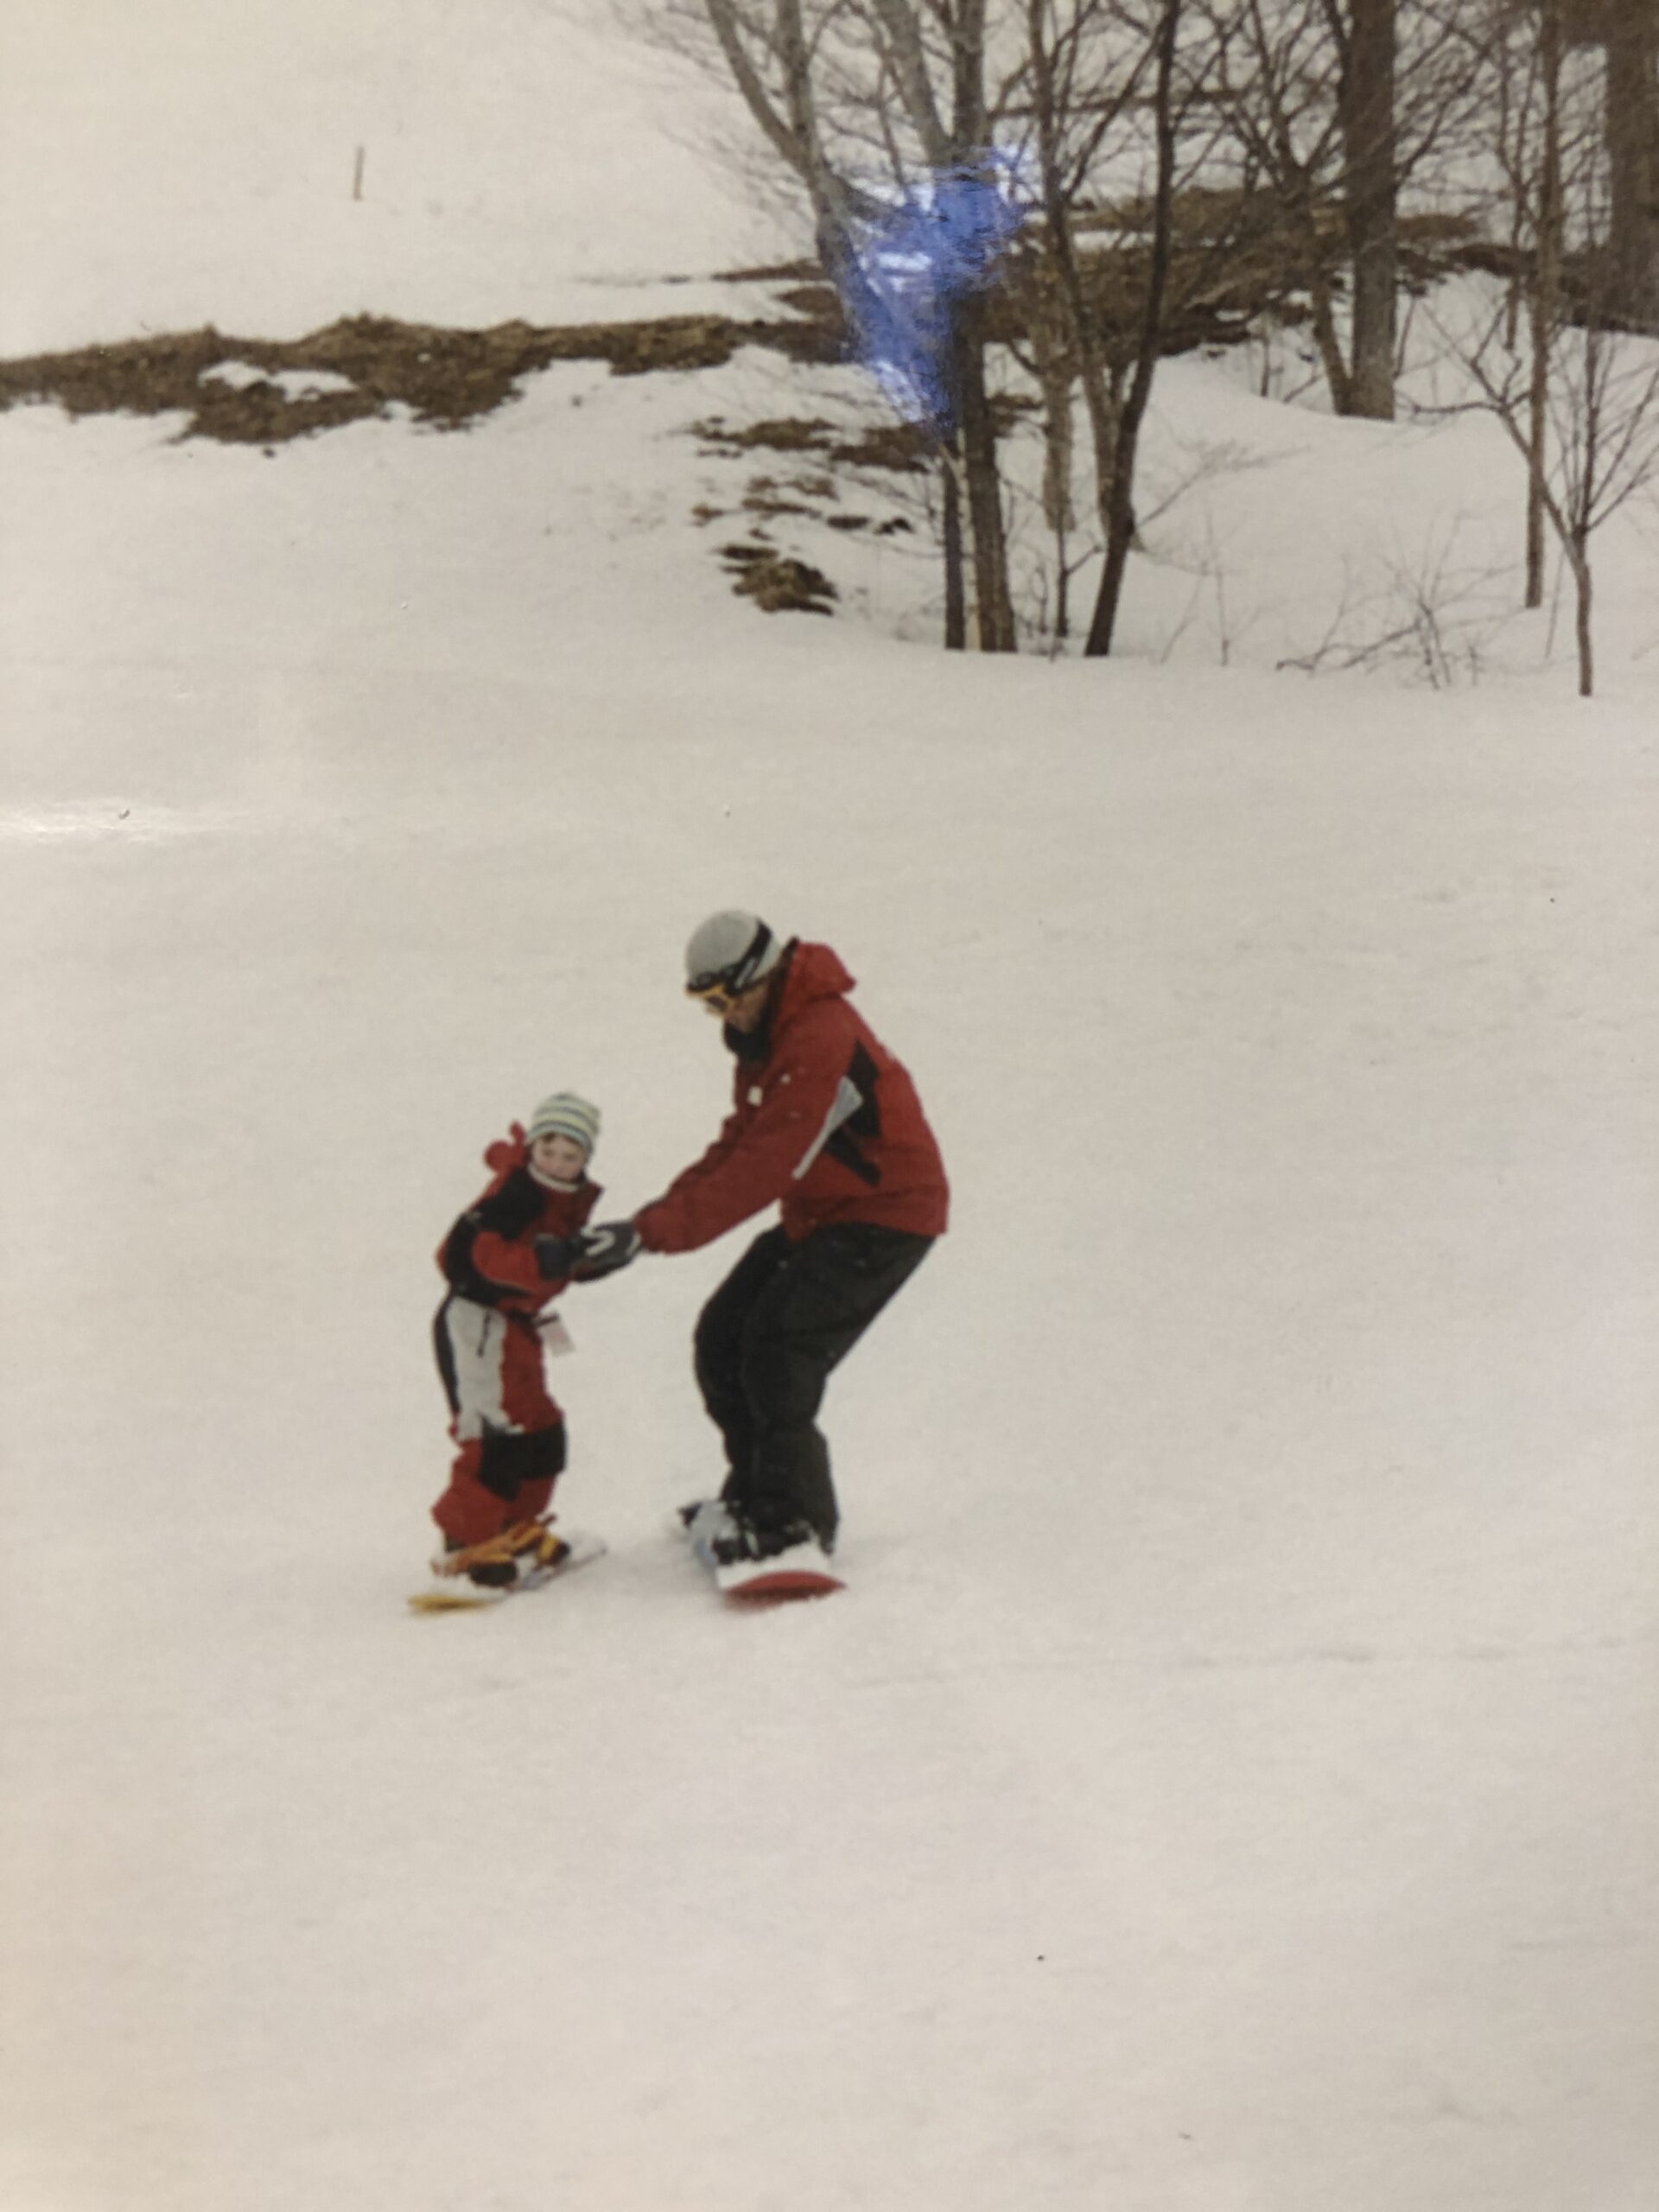 Bonding with dad over a snowboard